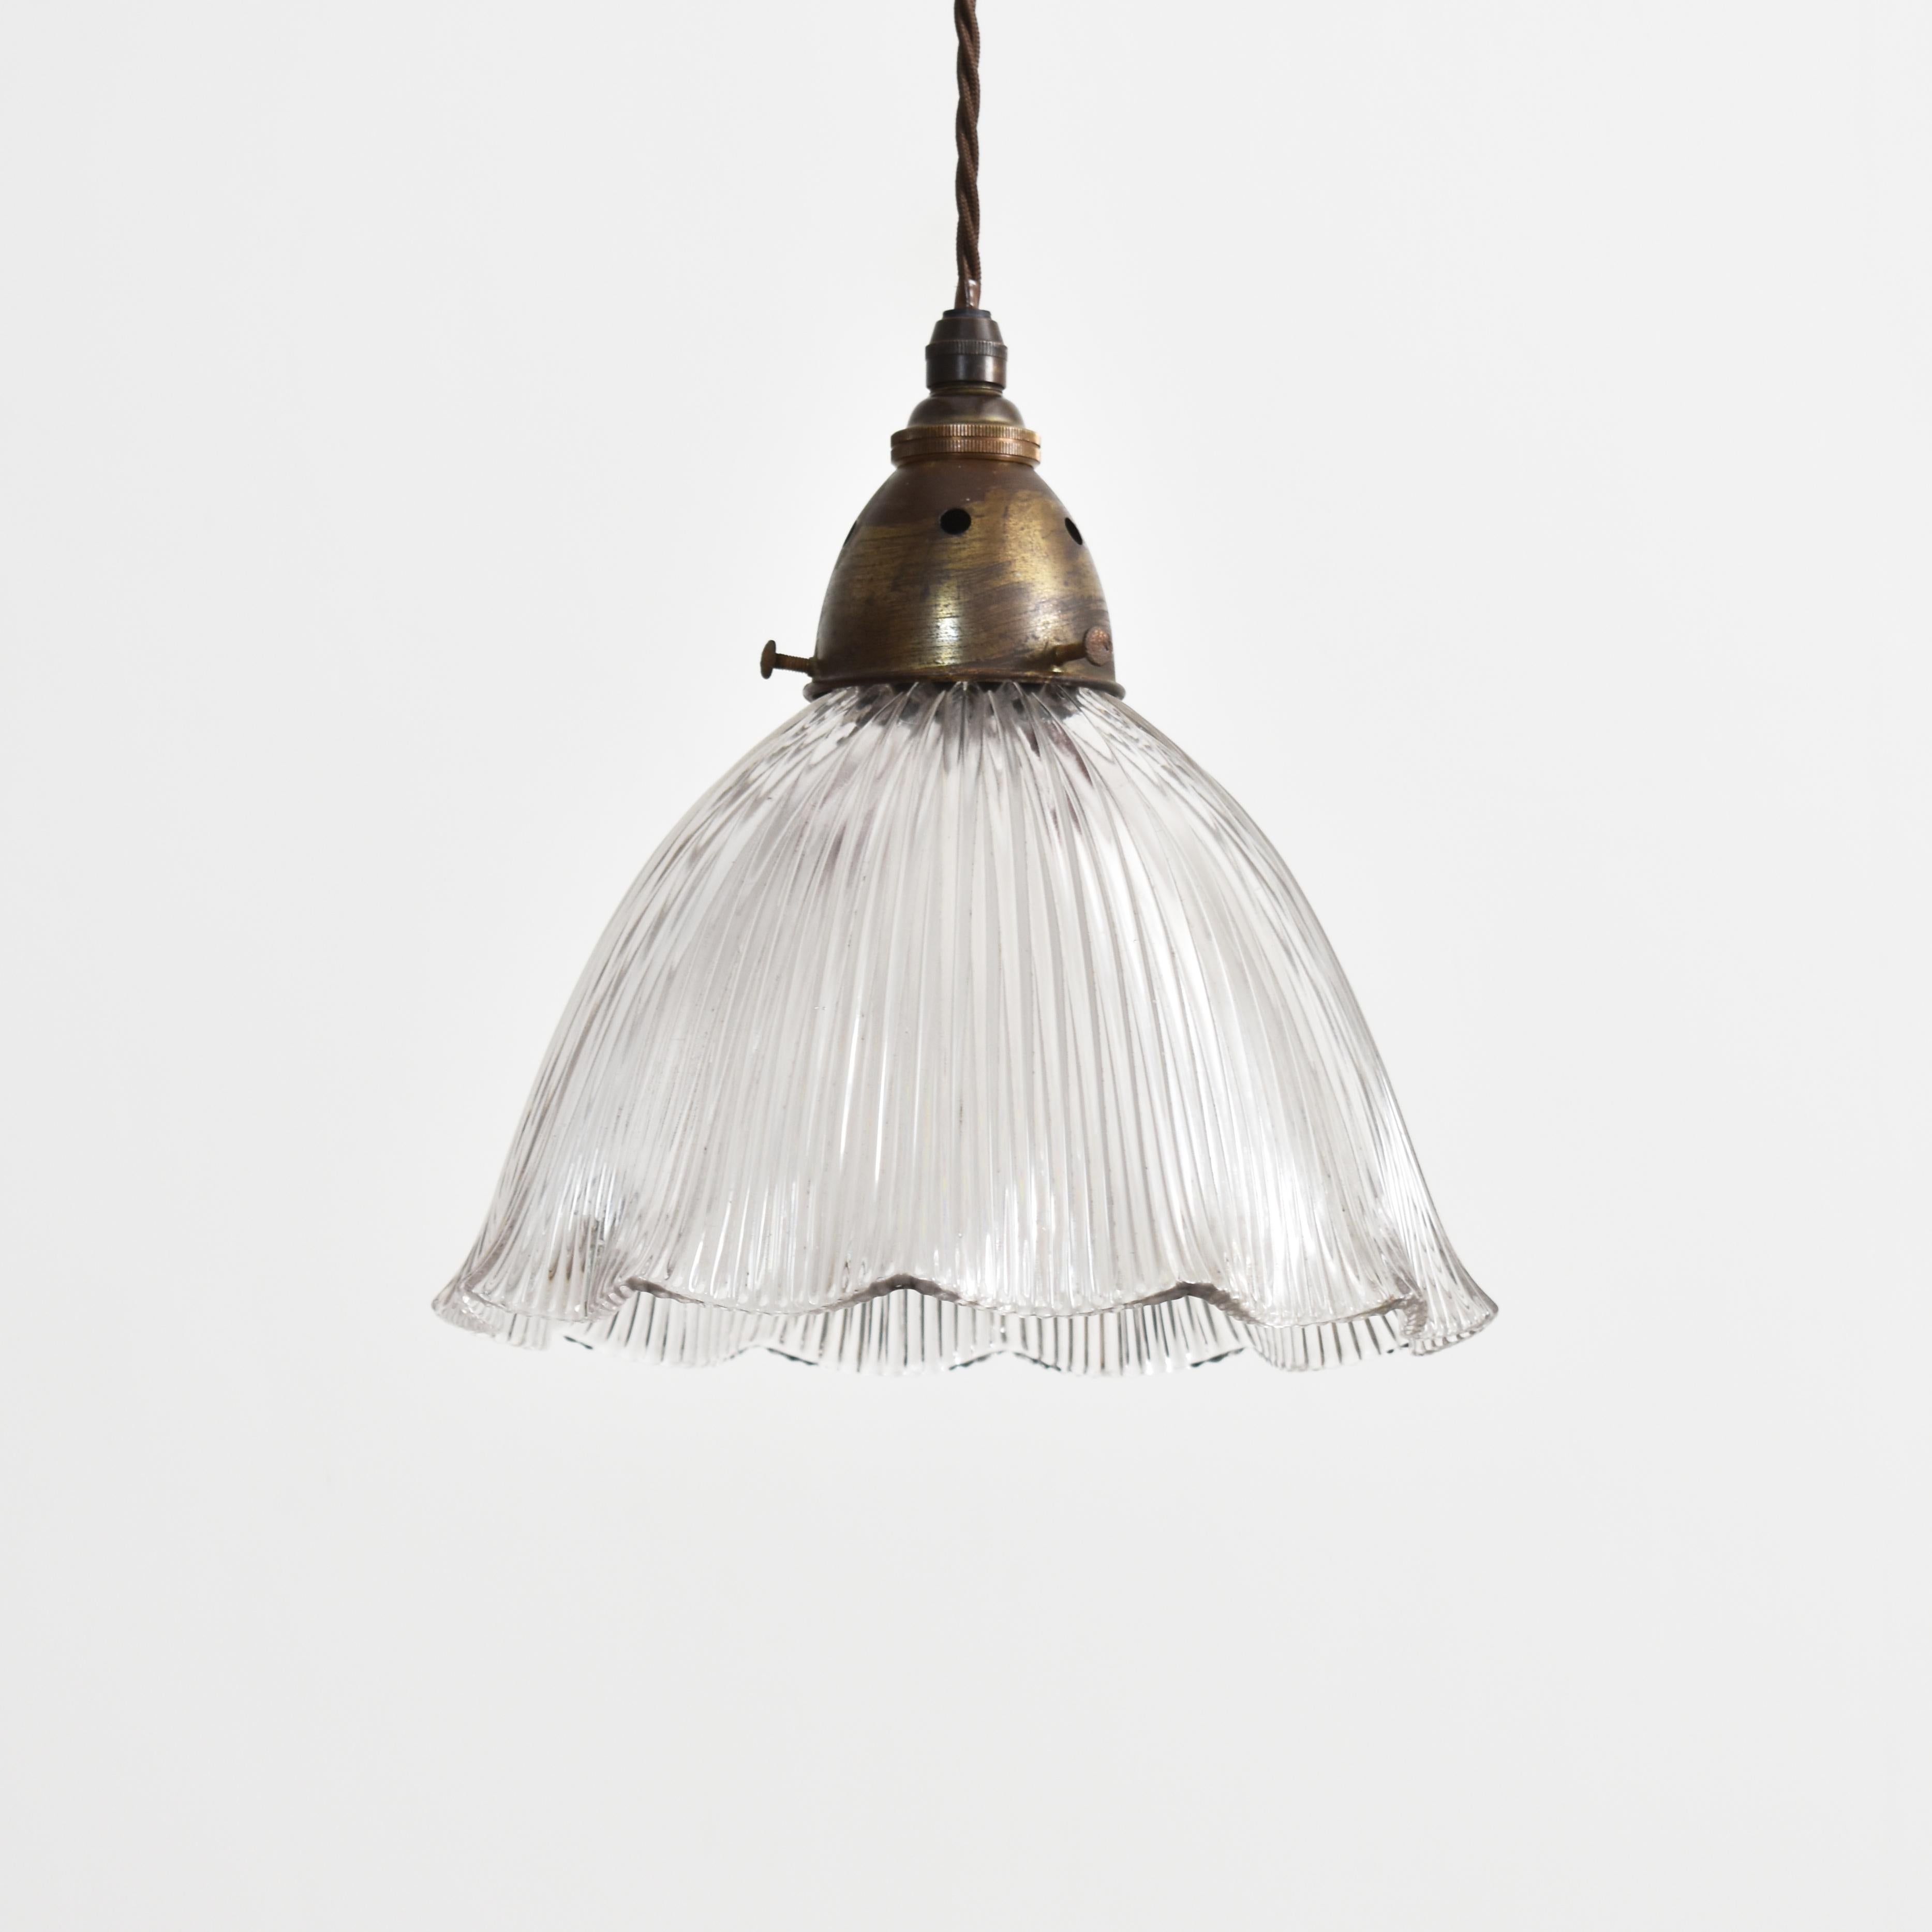 Pair Of Antique Glass Holophane Pendant Lights – C

A pair of antique pendant glass lights Manufactured by ‘Holophane’. The shapely glass prismatic shades look great both lit and unlit. The lights have retained their original brass galleries. The